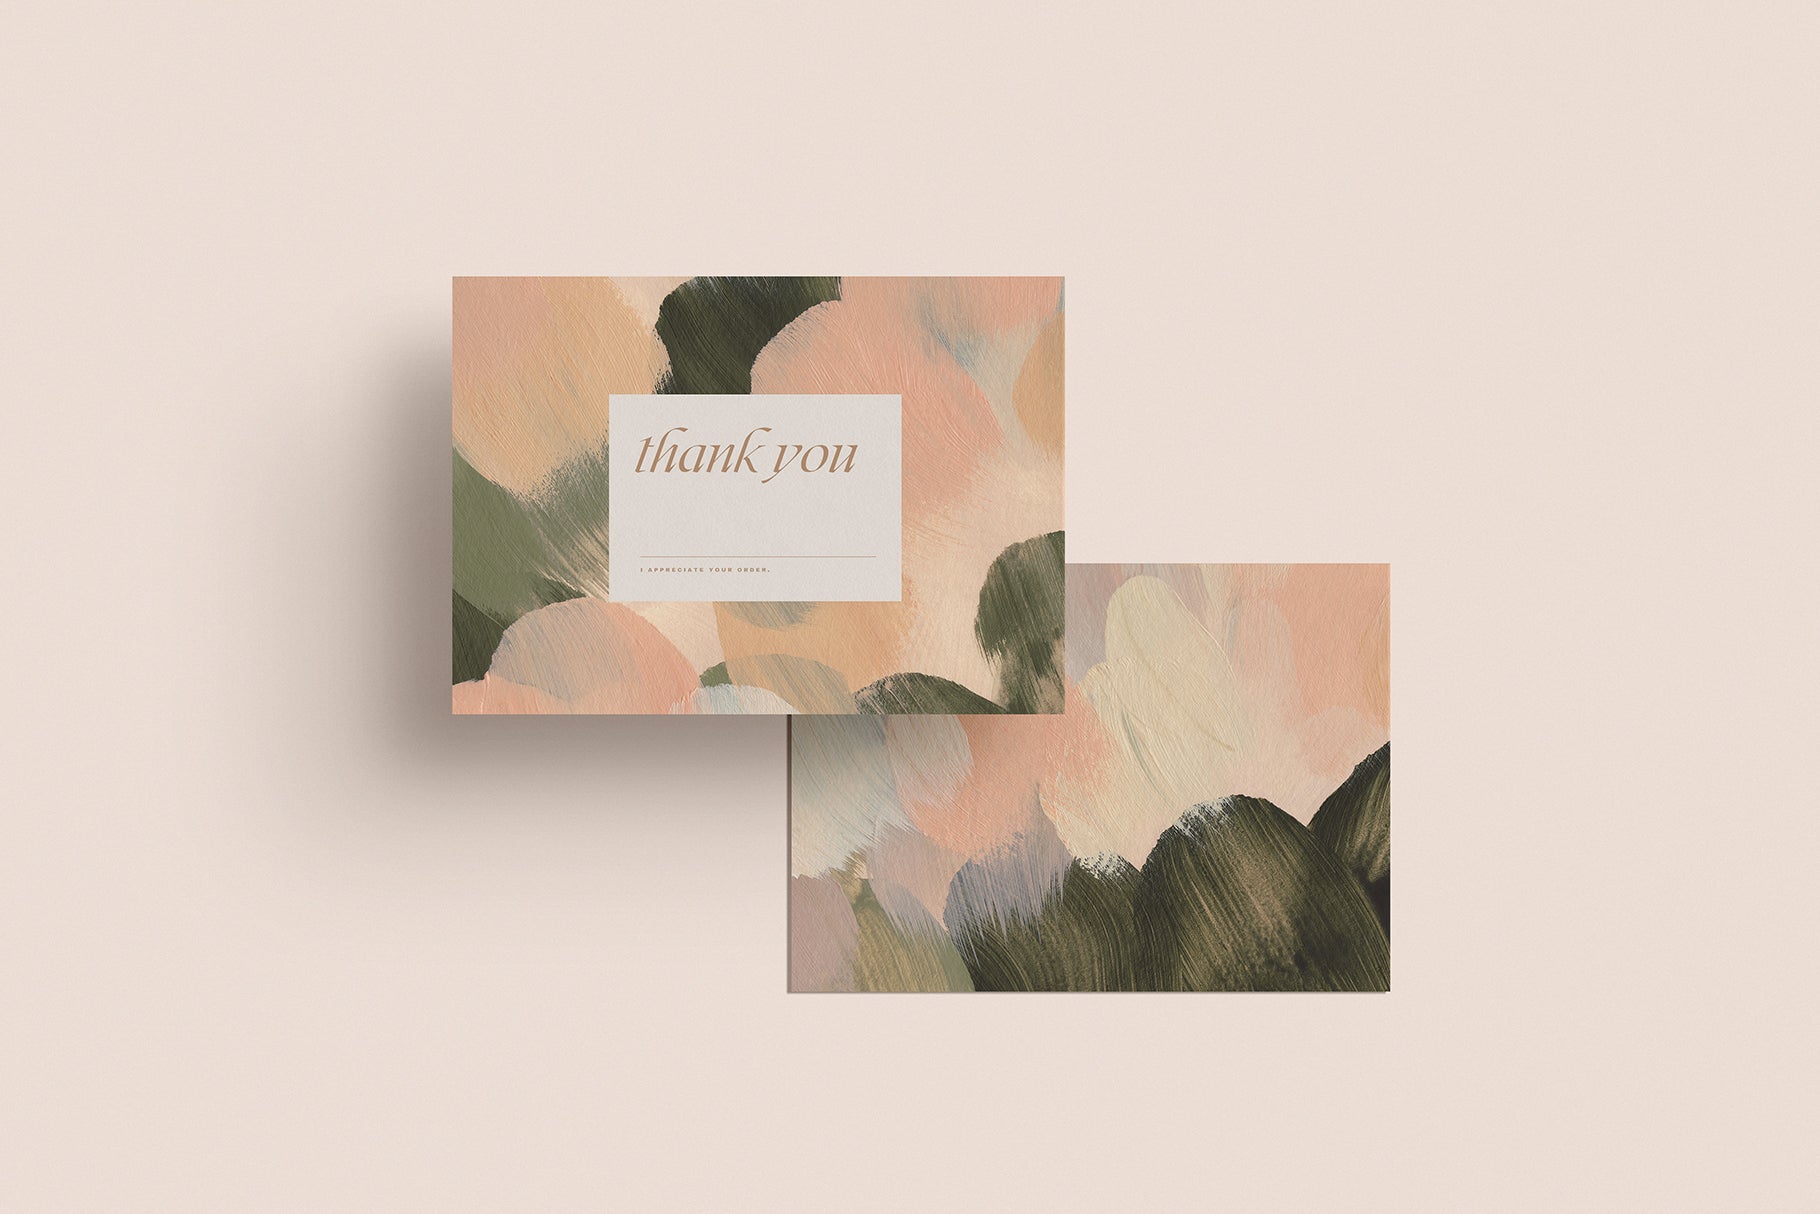 artistic thank you card design with painted background